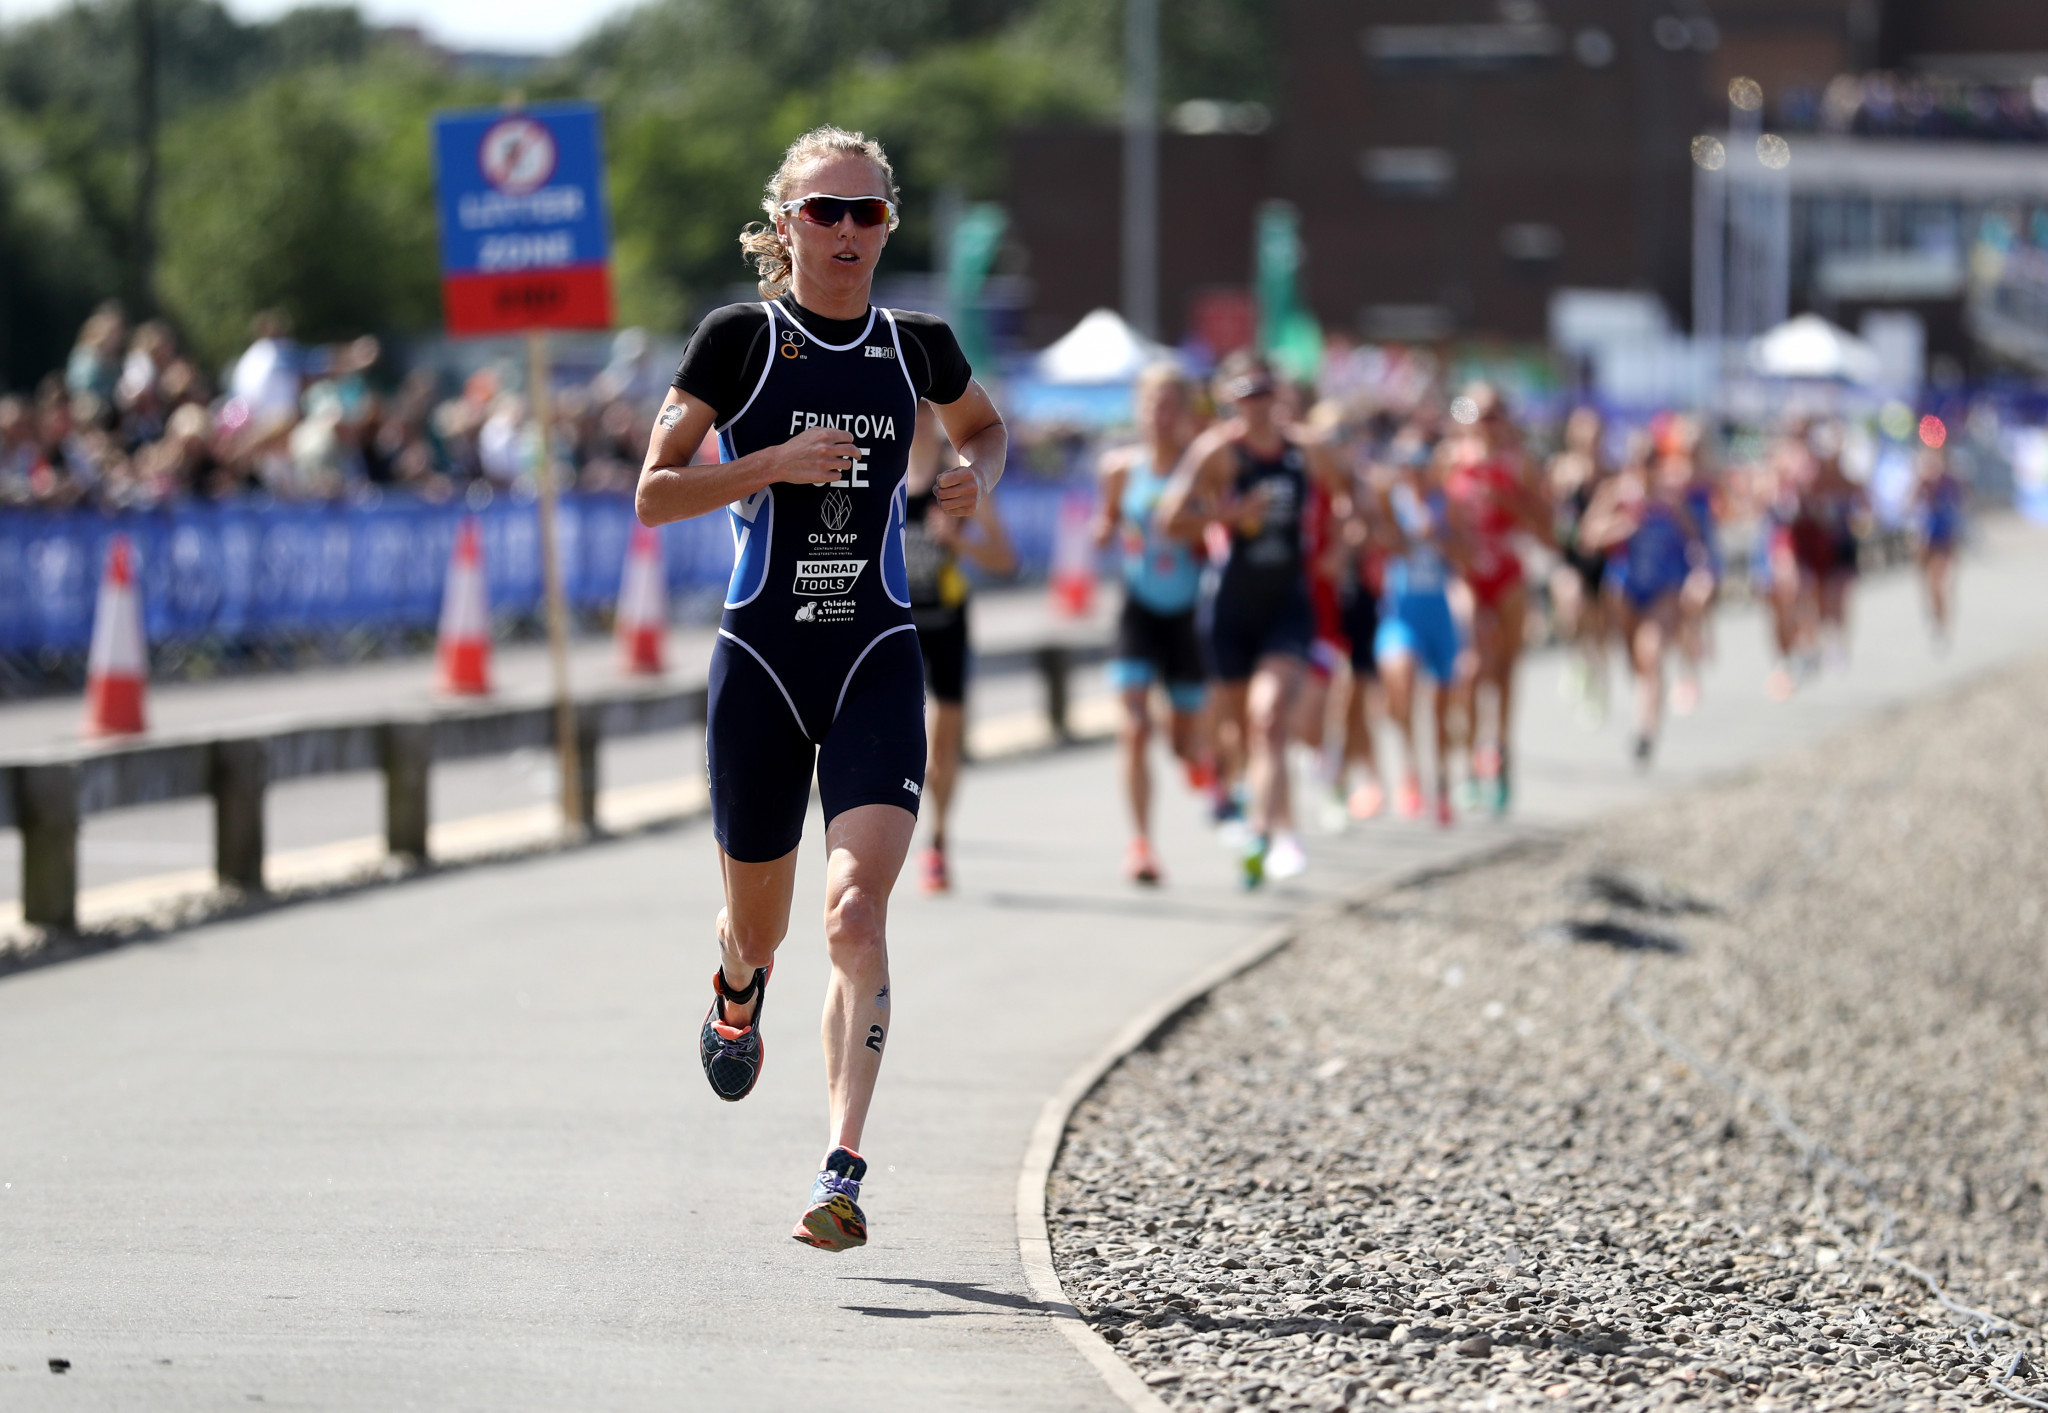 Frintová aiming for home success at Triathlon World Cup in Karlovy Vary